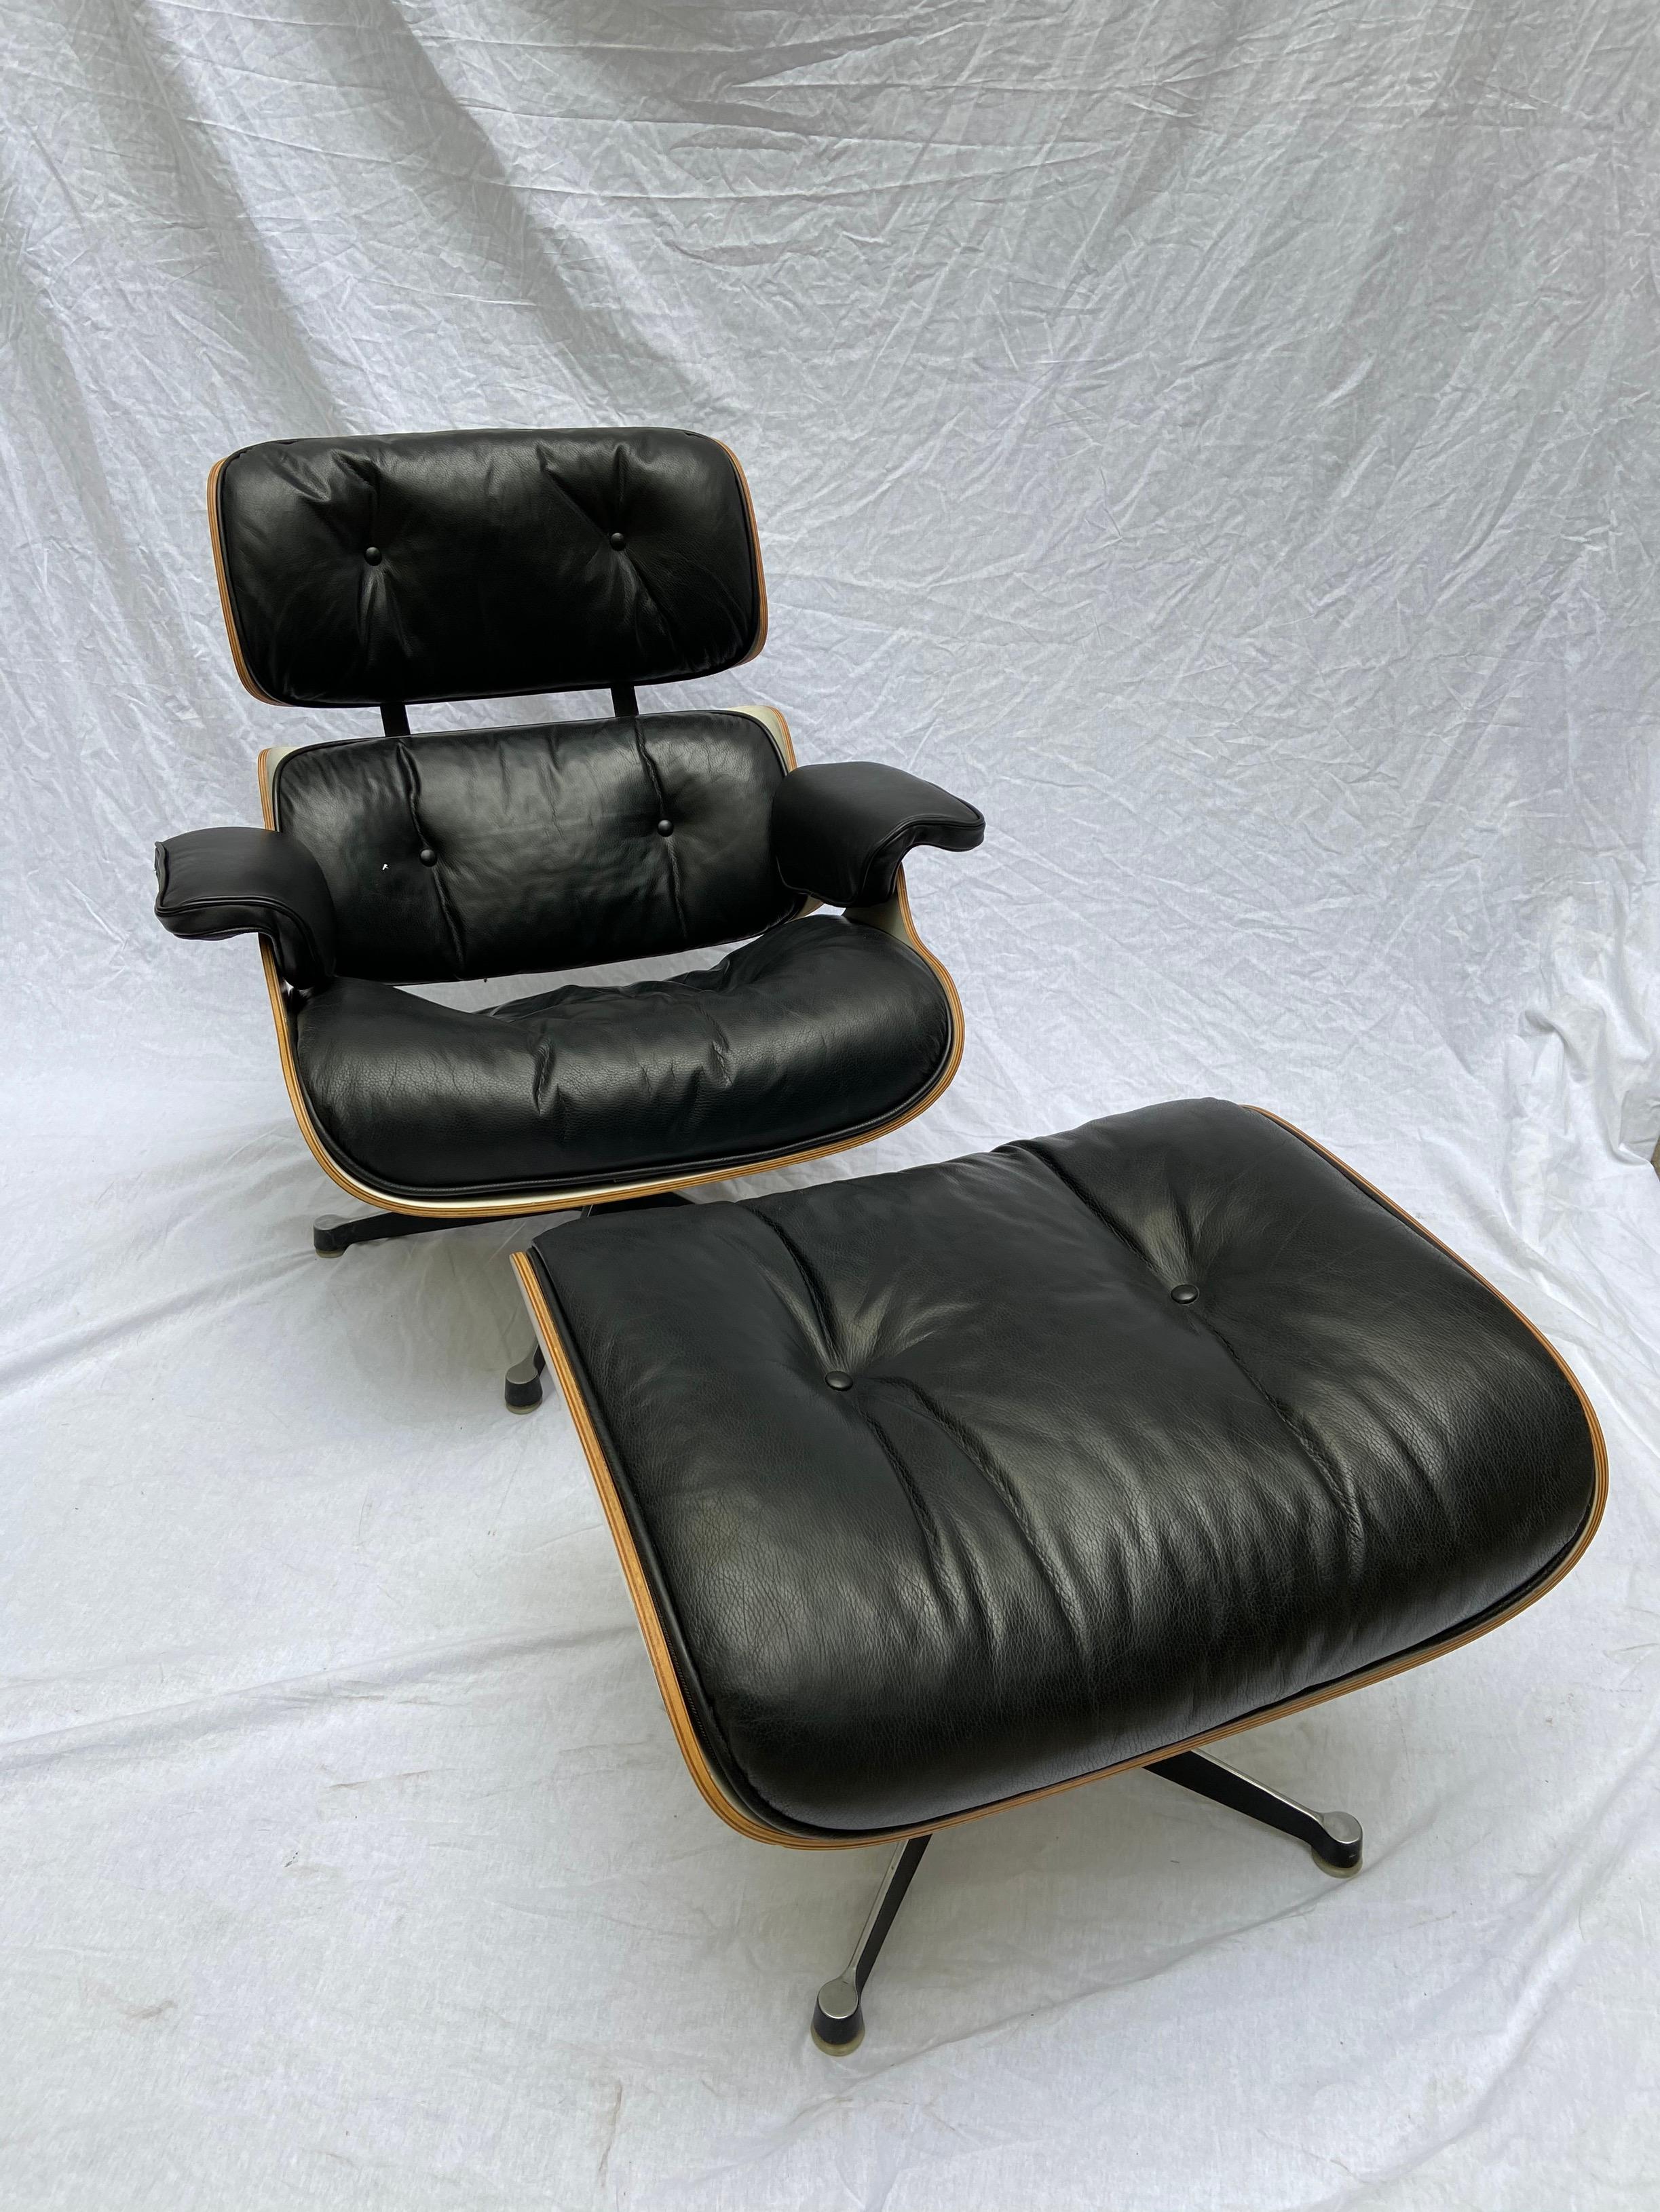 American Lounge Chair Charles Eames and Ottoman, 1977, Mobilier International